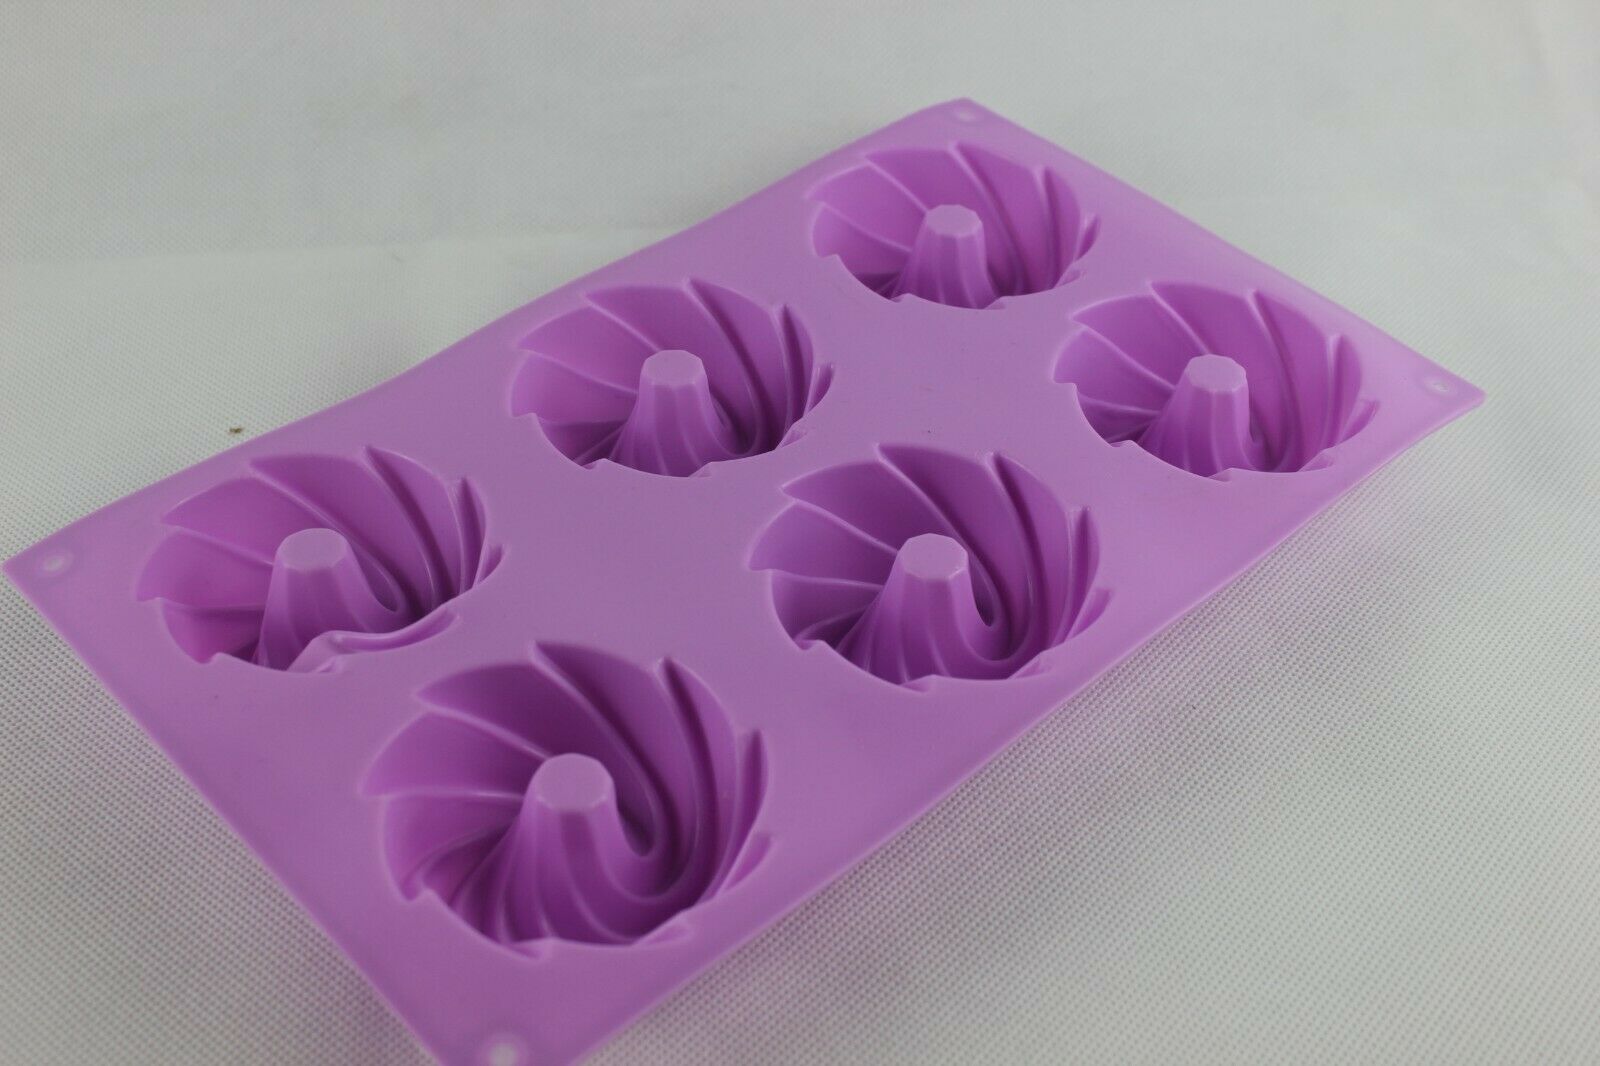 attachment-https://www.cupcakeaddicts.co.uk/wp-content/uploads/imported/7/Swirls-bunt-muffin-mould-6-cavity-soap-candle-sugarcraft-cake-cupcake-baking-323825444367-2.jpg